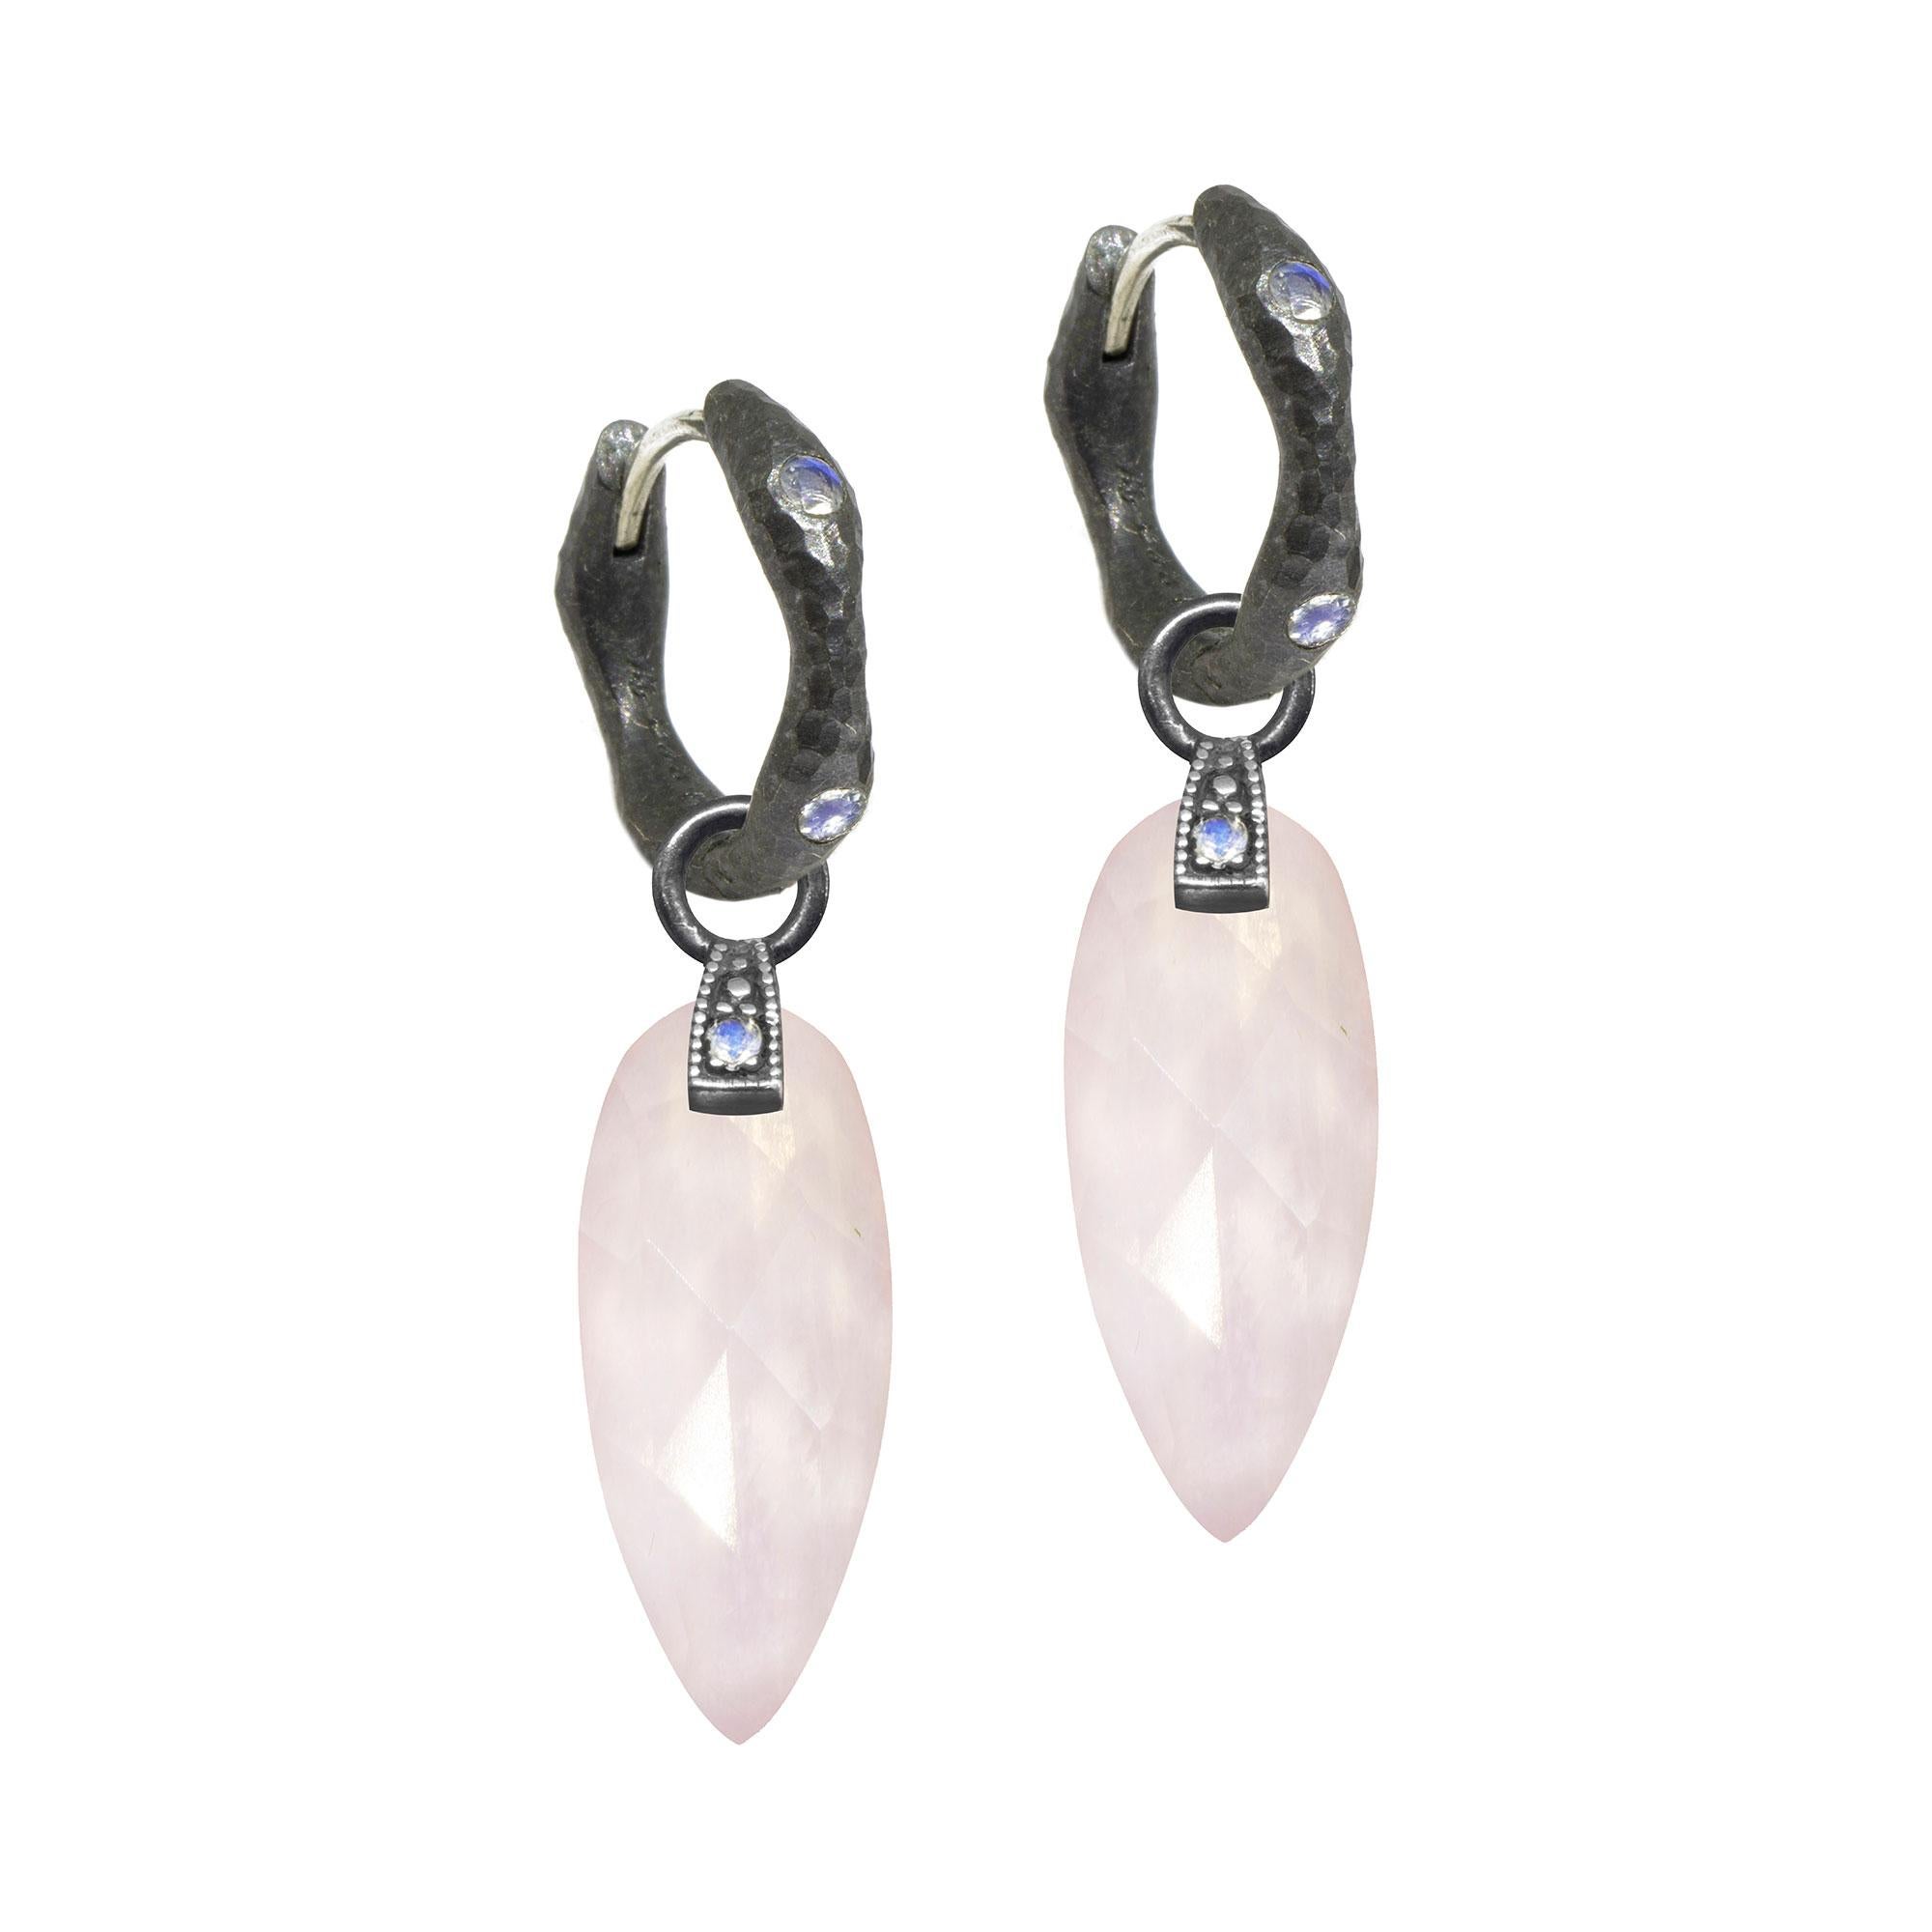 The perfect everyday style, the Angel Wings 20mm Oxidized Charms feature rose quartz drops dangling from a gemstone-studded bale.
Nina Nguyen Design's patent-pending earrings have an element on the back of the stud or charm to allow these pieces to